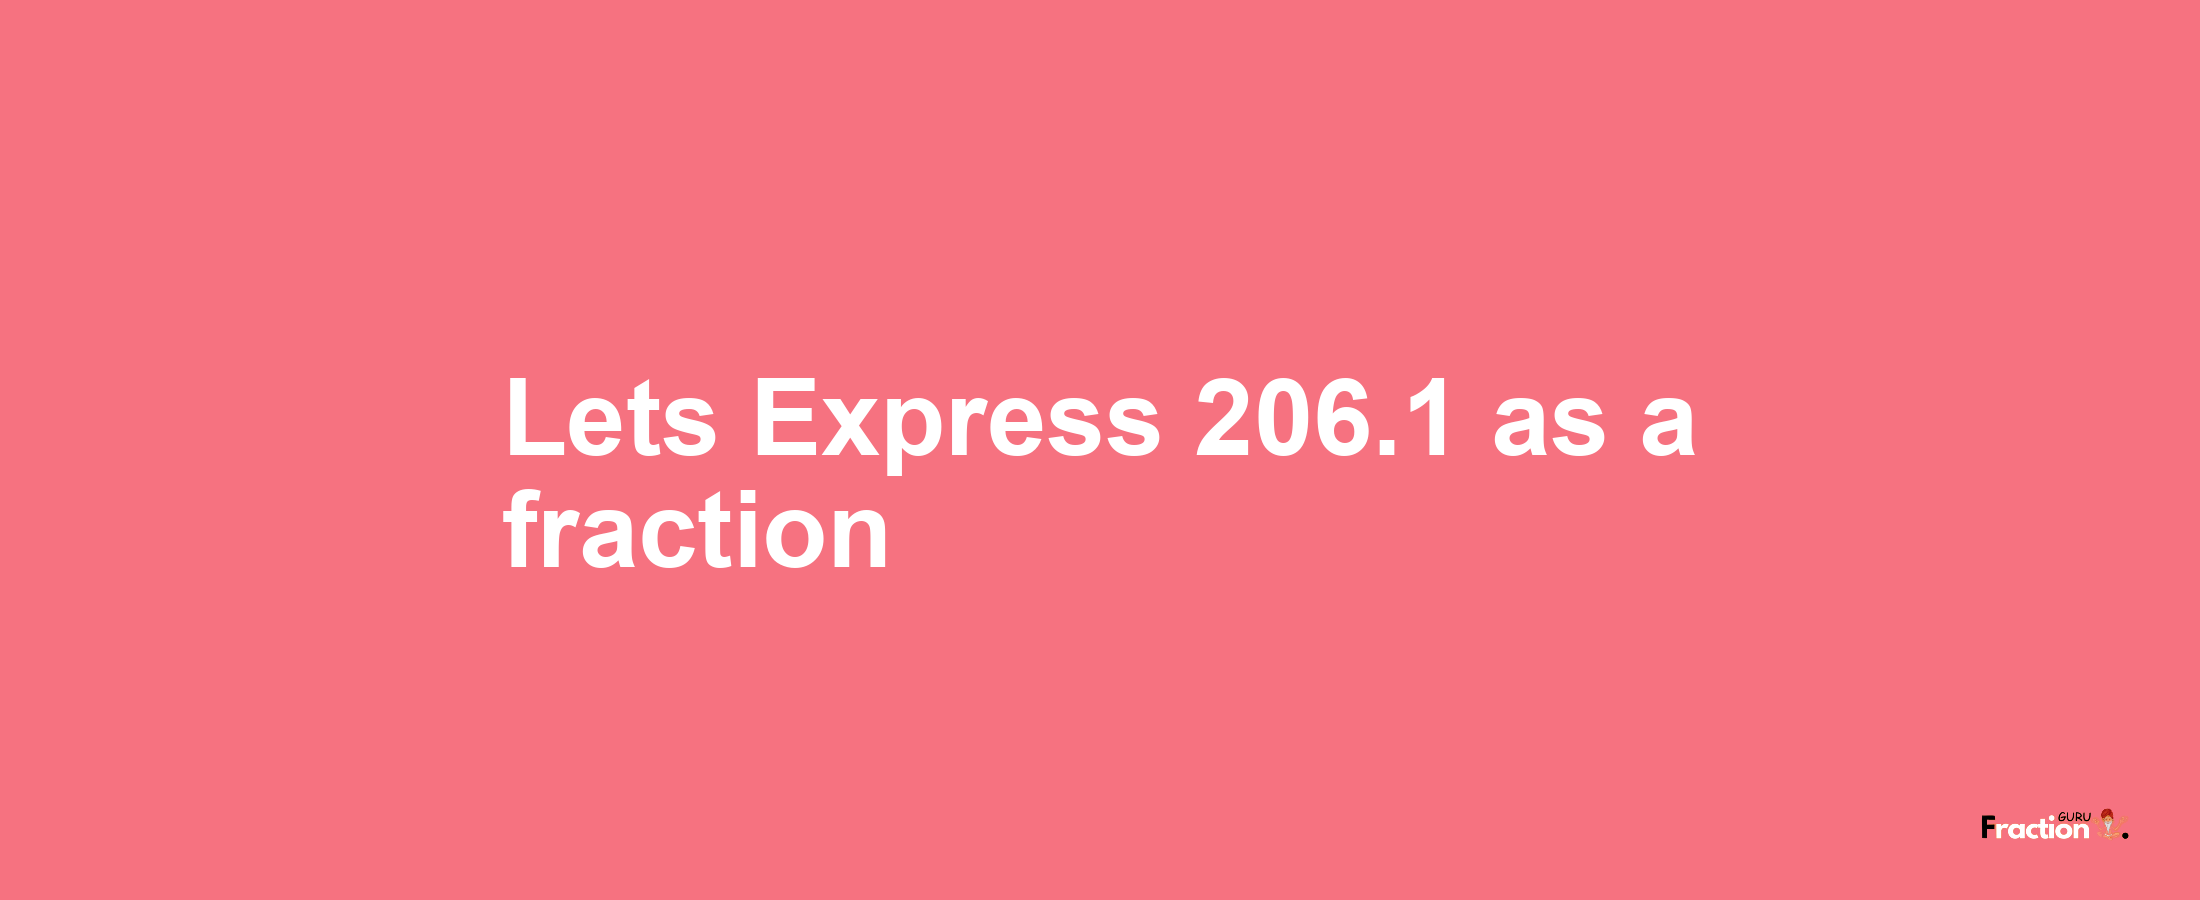 Lets Express 206.1 as afraction